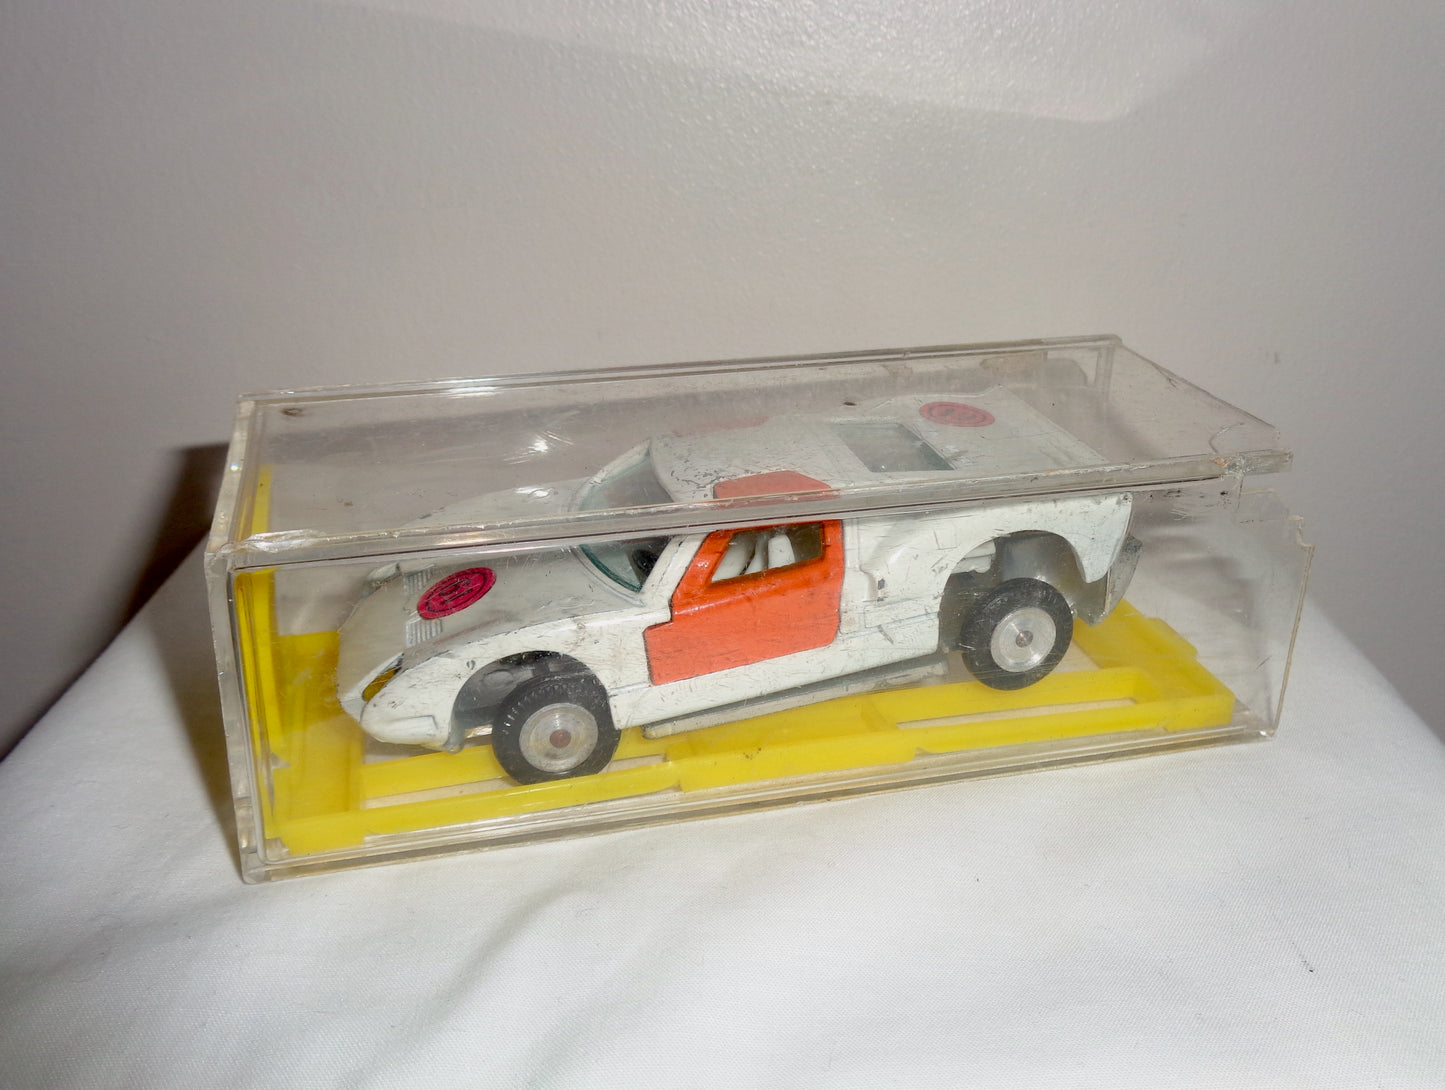 1960s Gamda Koor Sabra White Ford GT No. 8104 1/43 Toy Car. Made in Israel